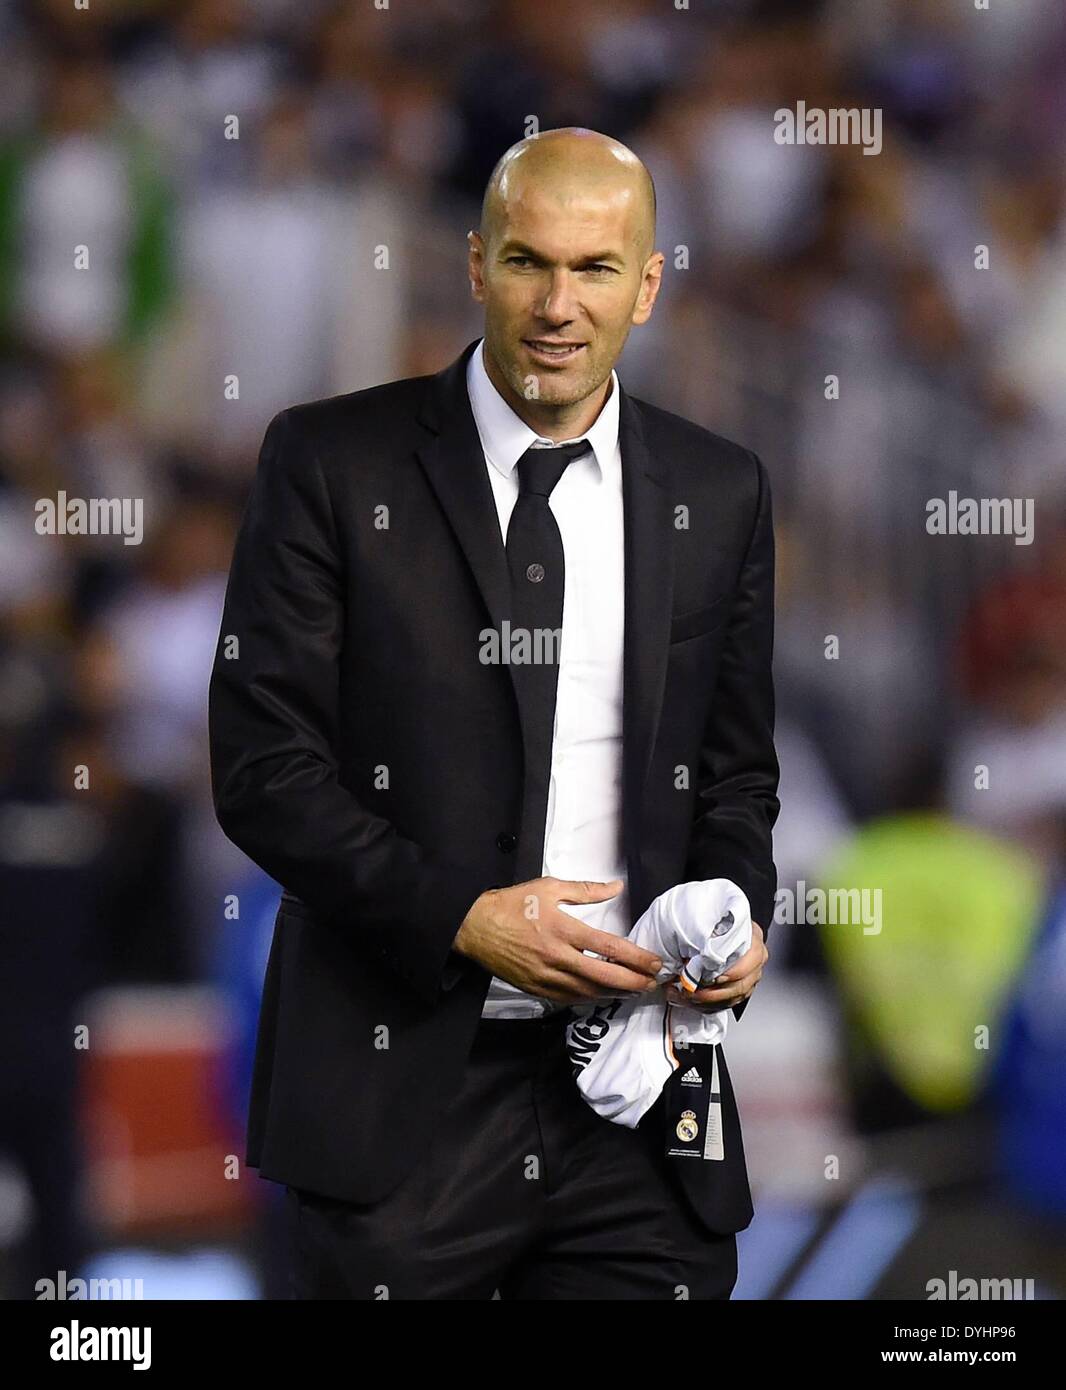 Mestalla, Valencia, Spain. 16th Apr, 2014. Copa Del Rey Cup final. Barcelona versus Real Madrid. Co Trainer Zinedine Zidane (Real Madrid) at the final whistle © Action Plus Sports/Alamy Live News Stock Photo